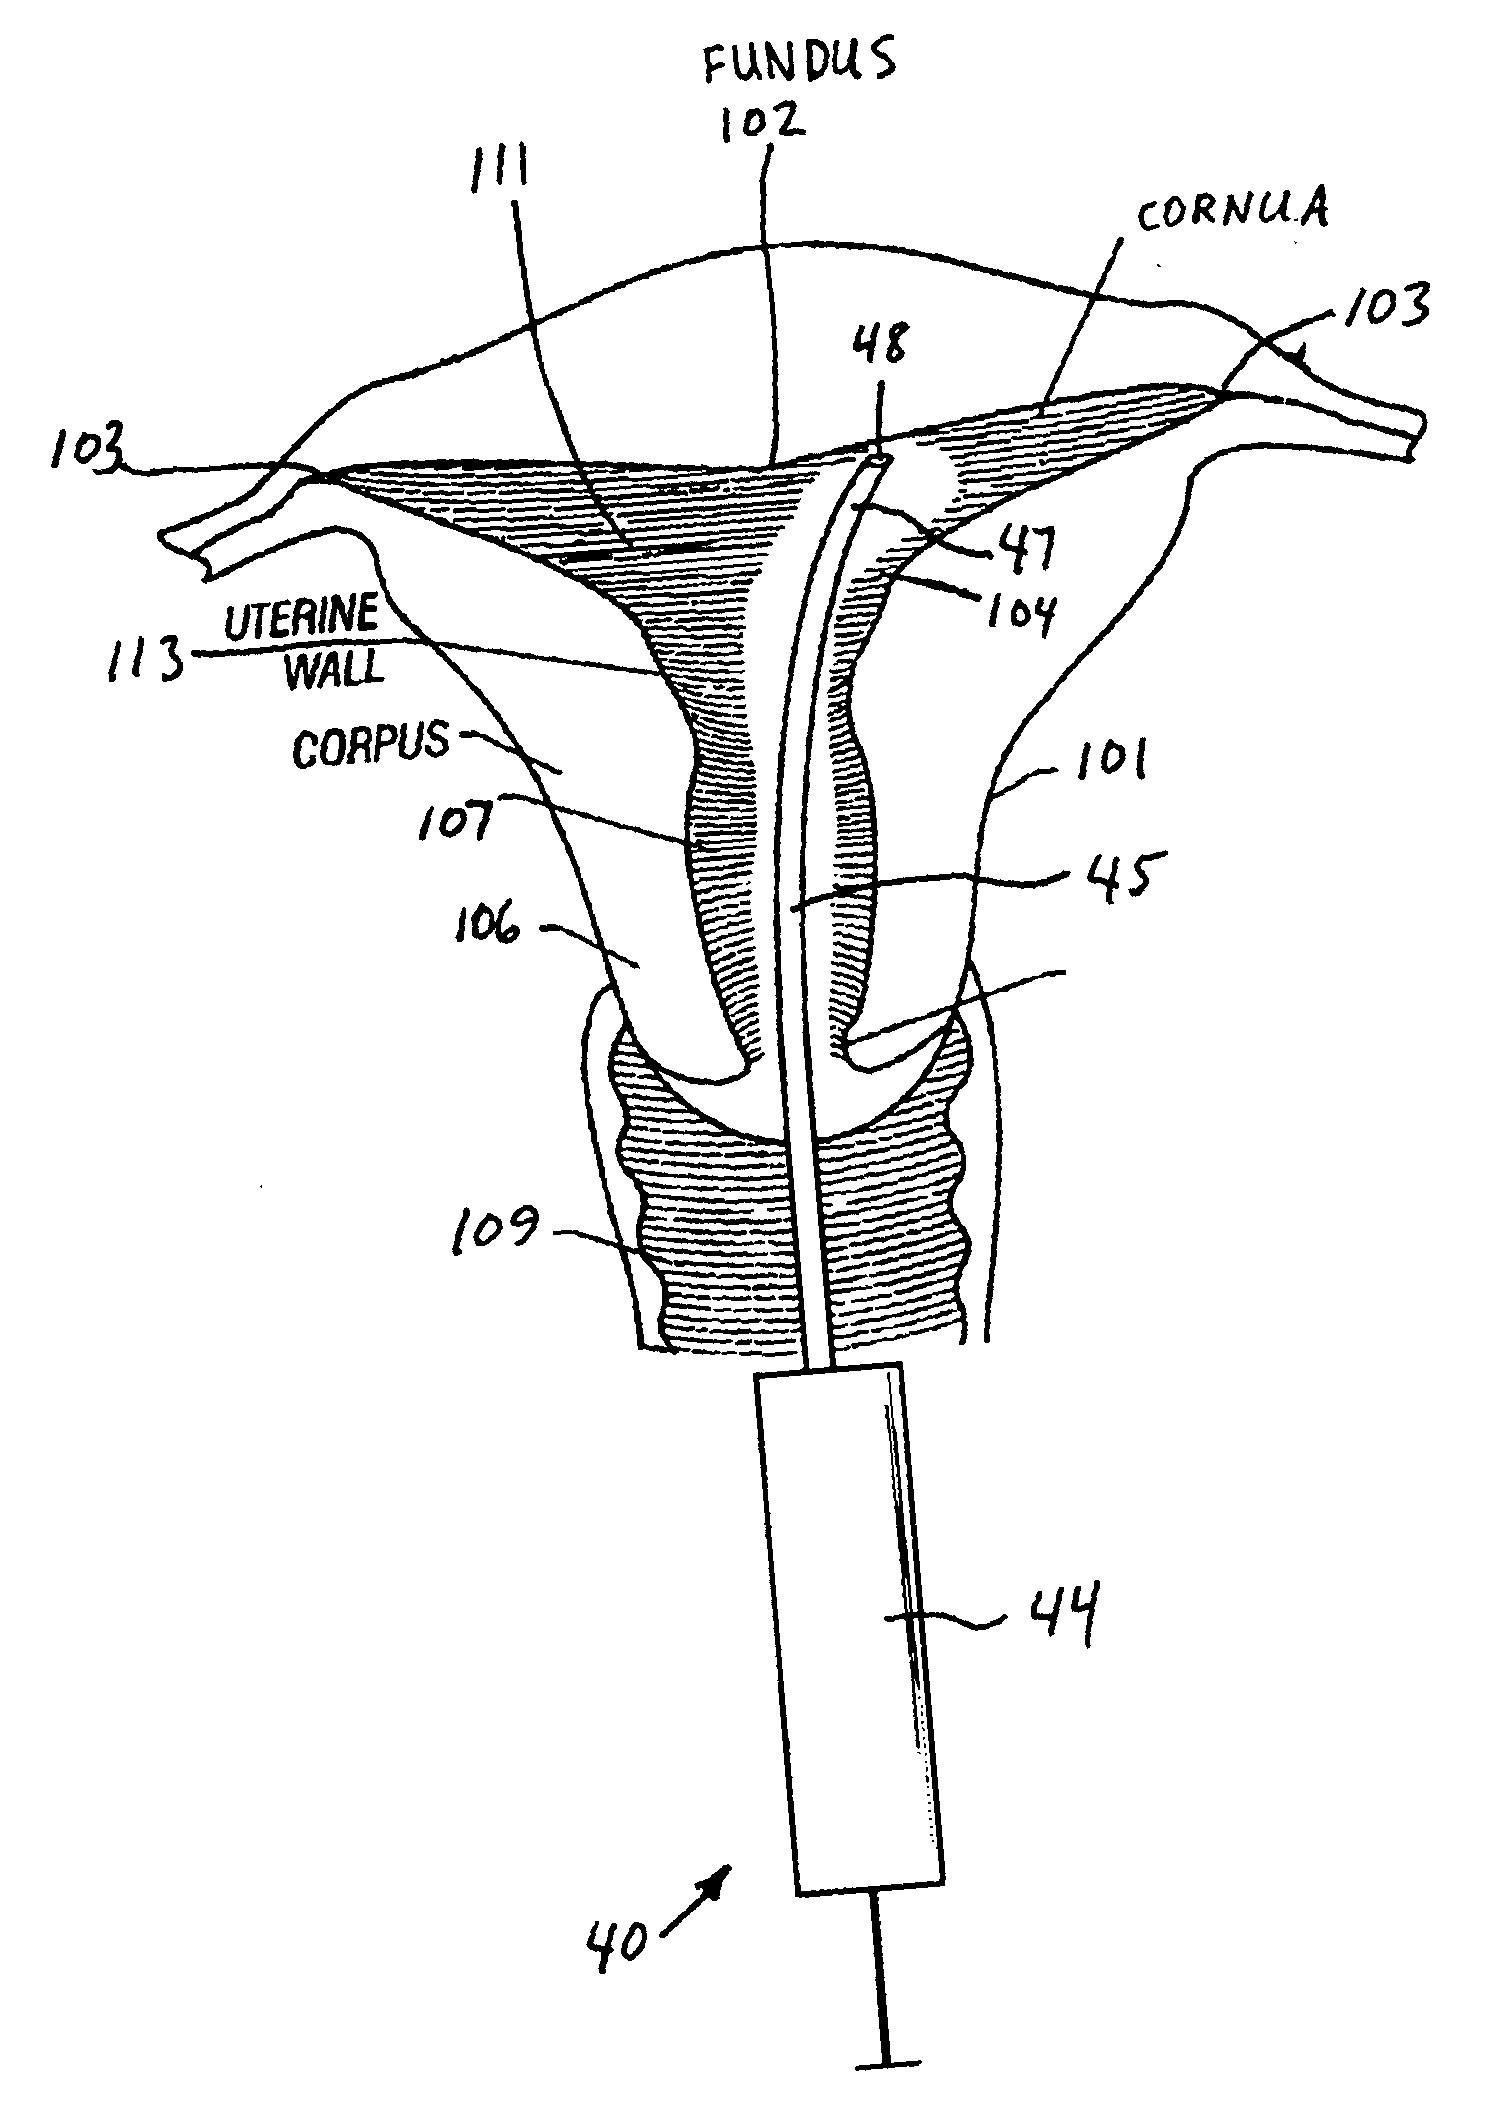 Method and apparatus for anesthetizing a uterus